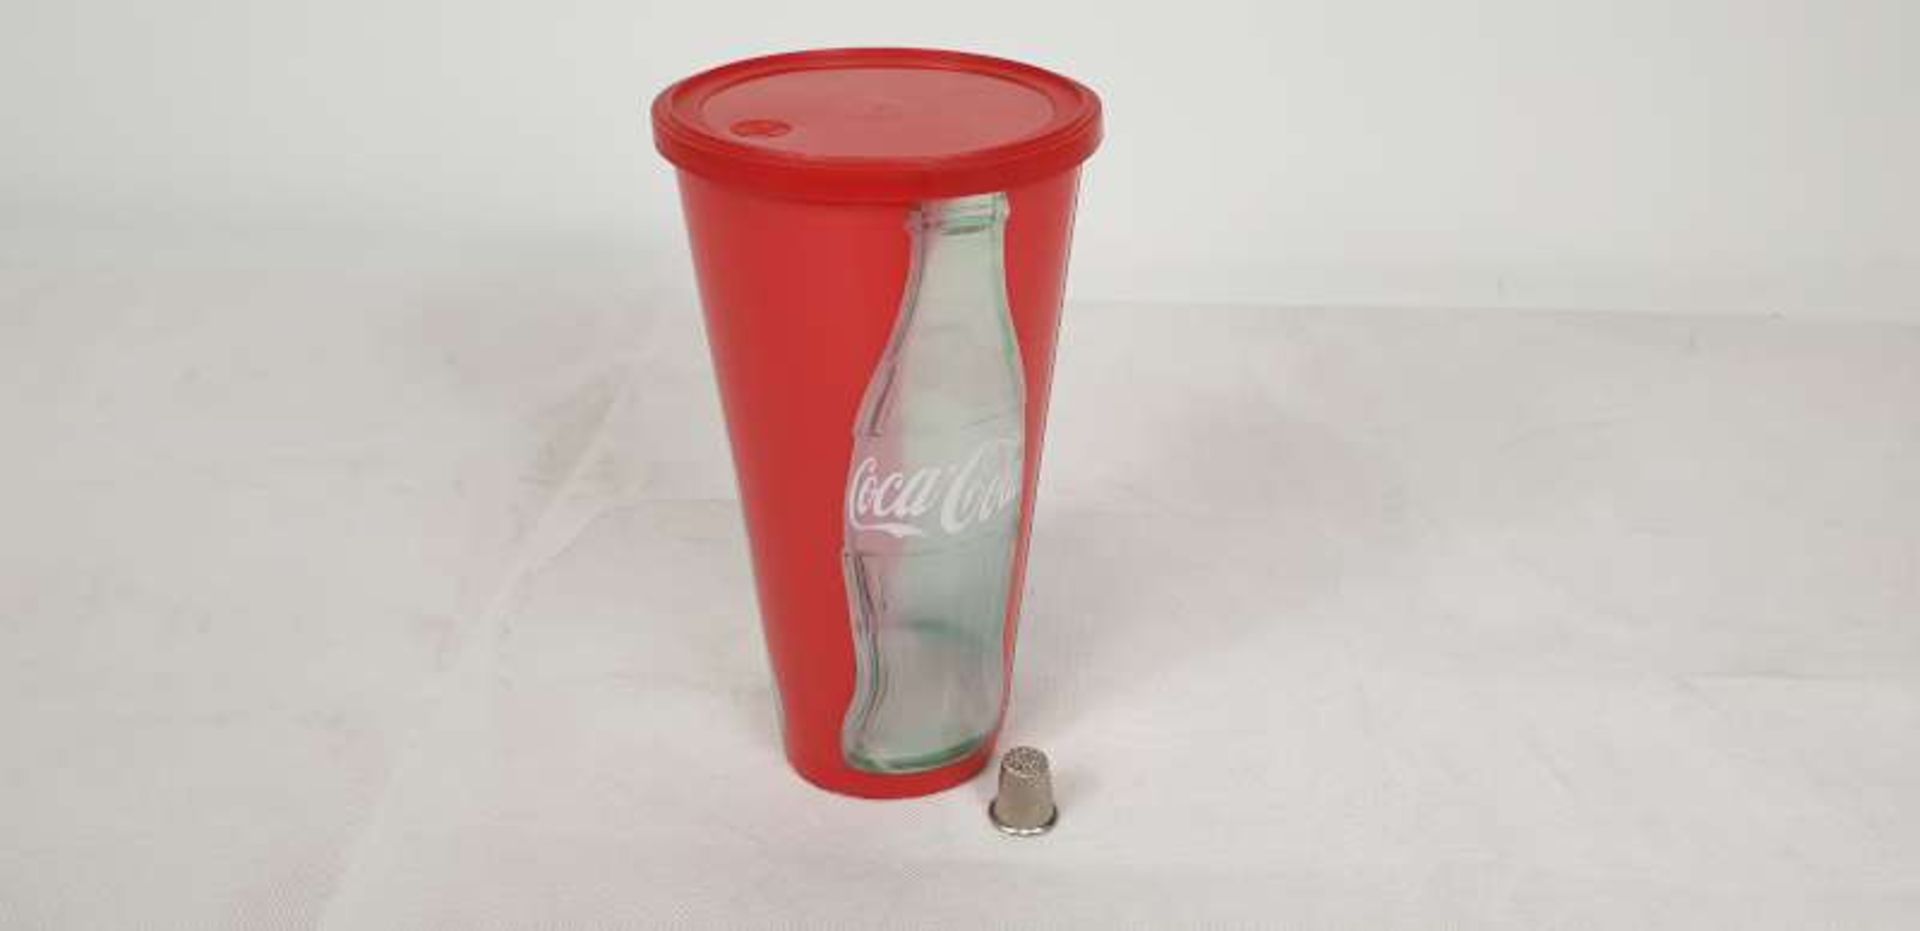 600 X REUSABLE COCA COLA CUPS IN 3 BOXES